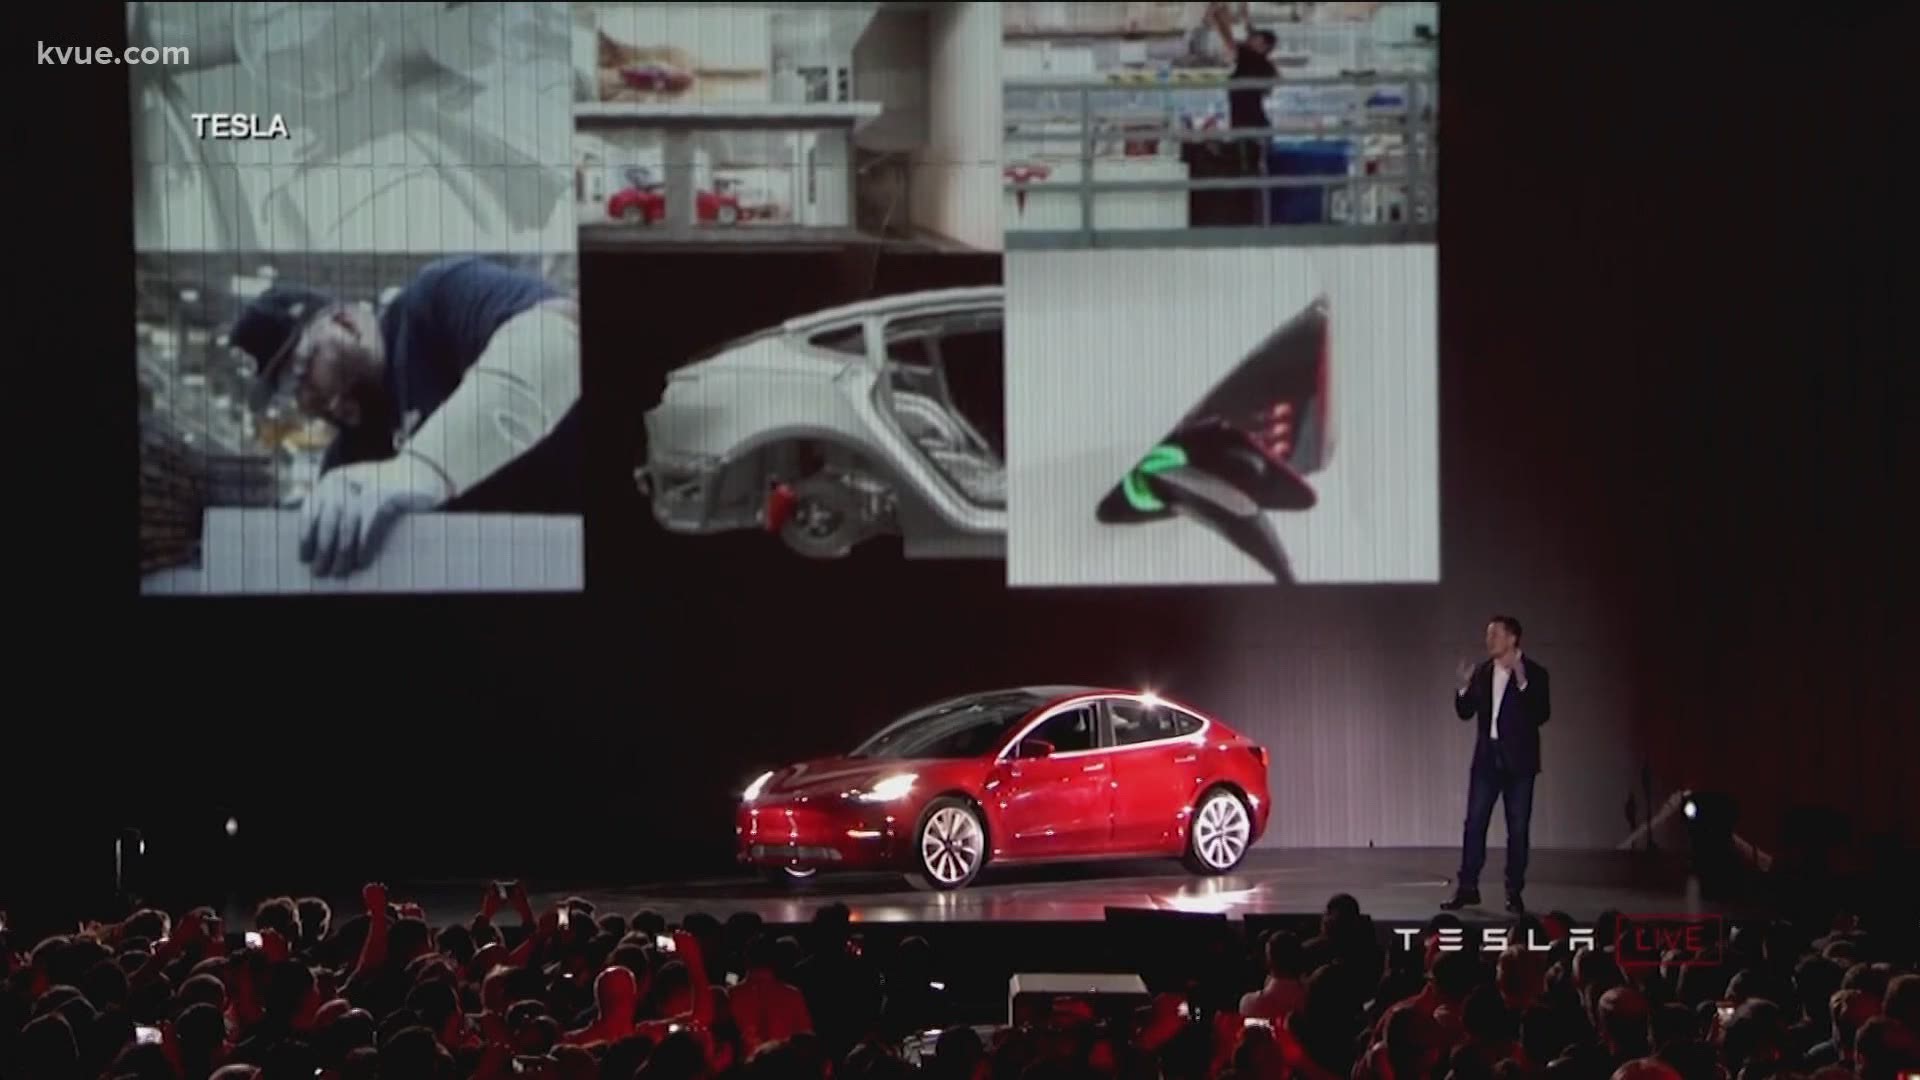 KVUE's Molly Oak takes a closer look at the jobs Tesla promises to create.